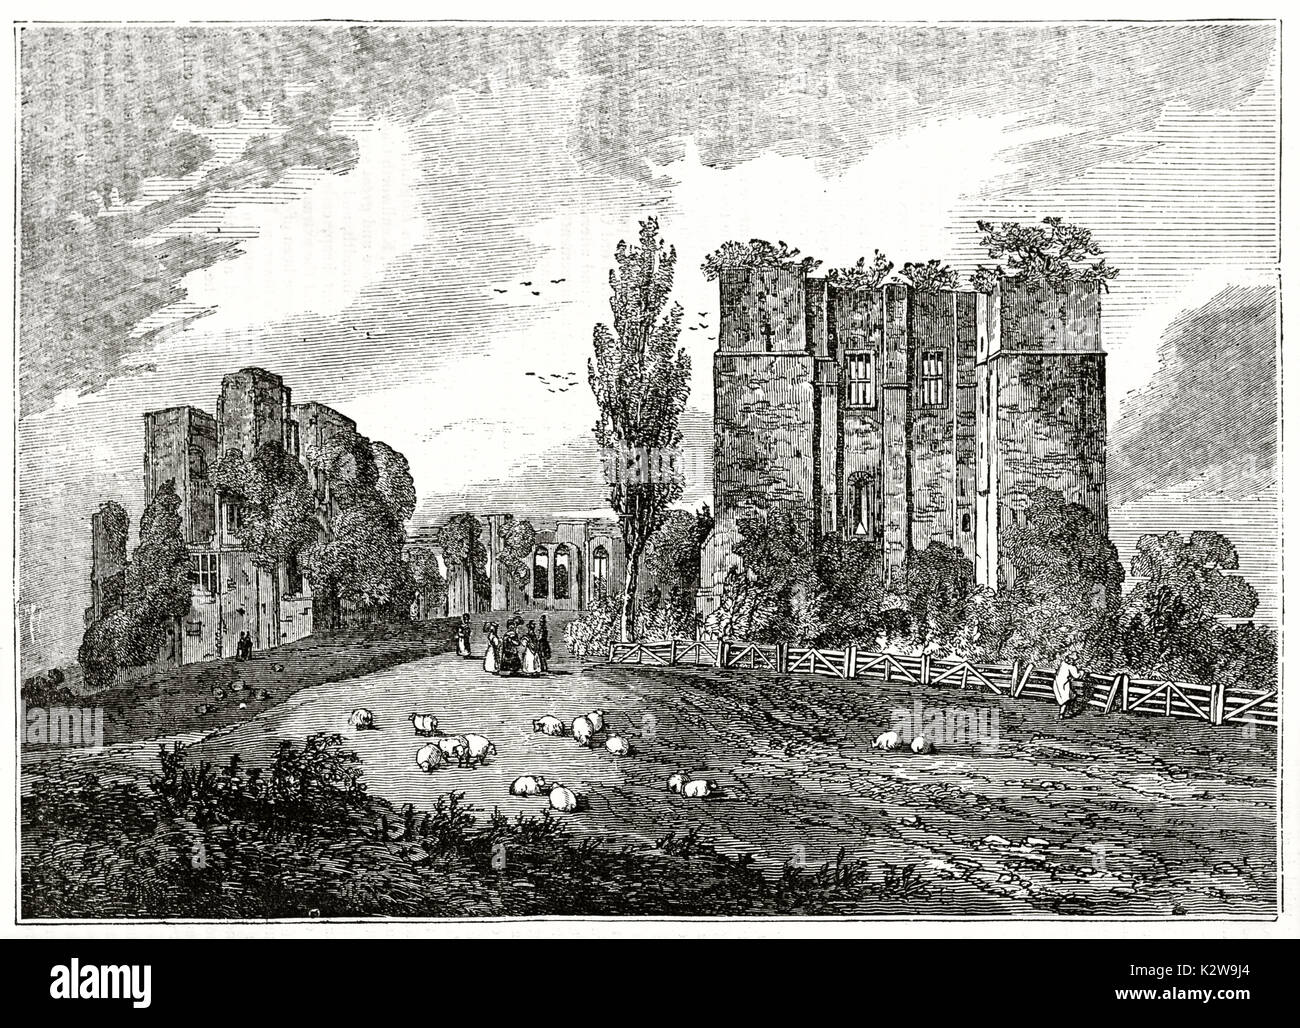 Old view of Kenilworth castle ruins, England. By unidentified author, published on the Penny Magazine, London, 1835 Stock Photo